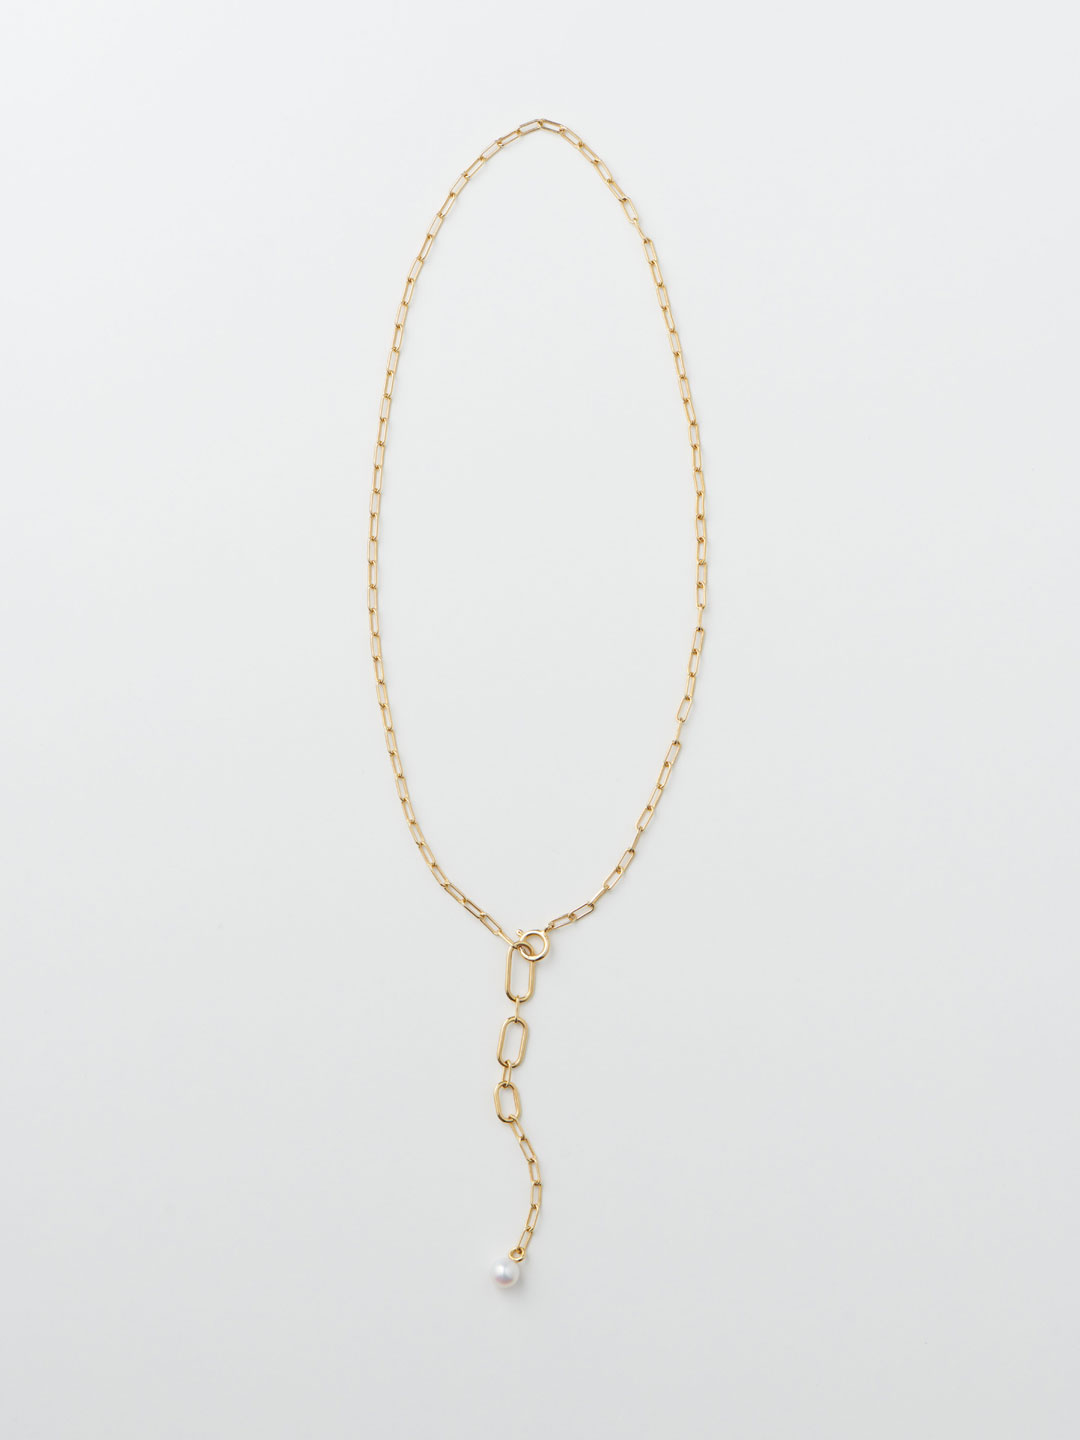 Ends Meet Necklace - Yellow Gold